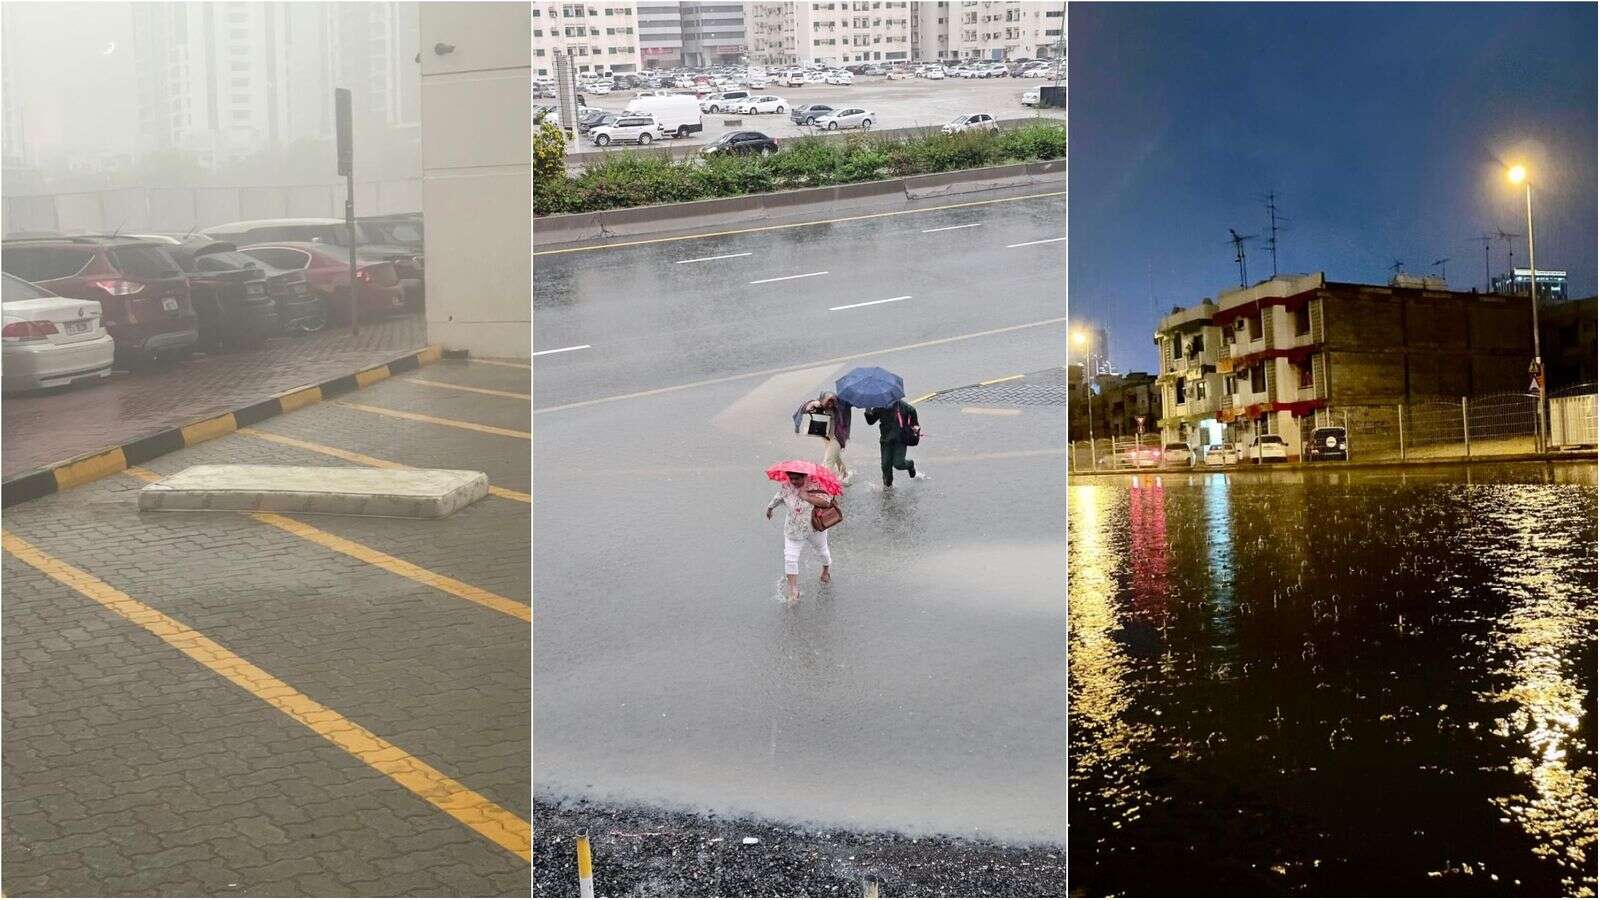 live: heavy rains, hail batter uae as residents wake up to thunderstorm